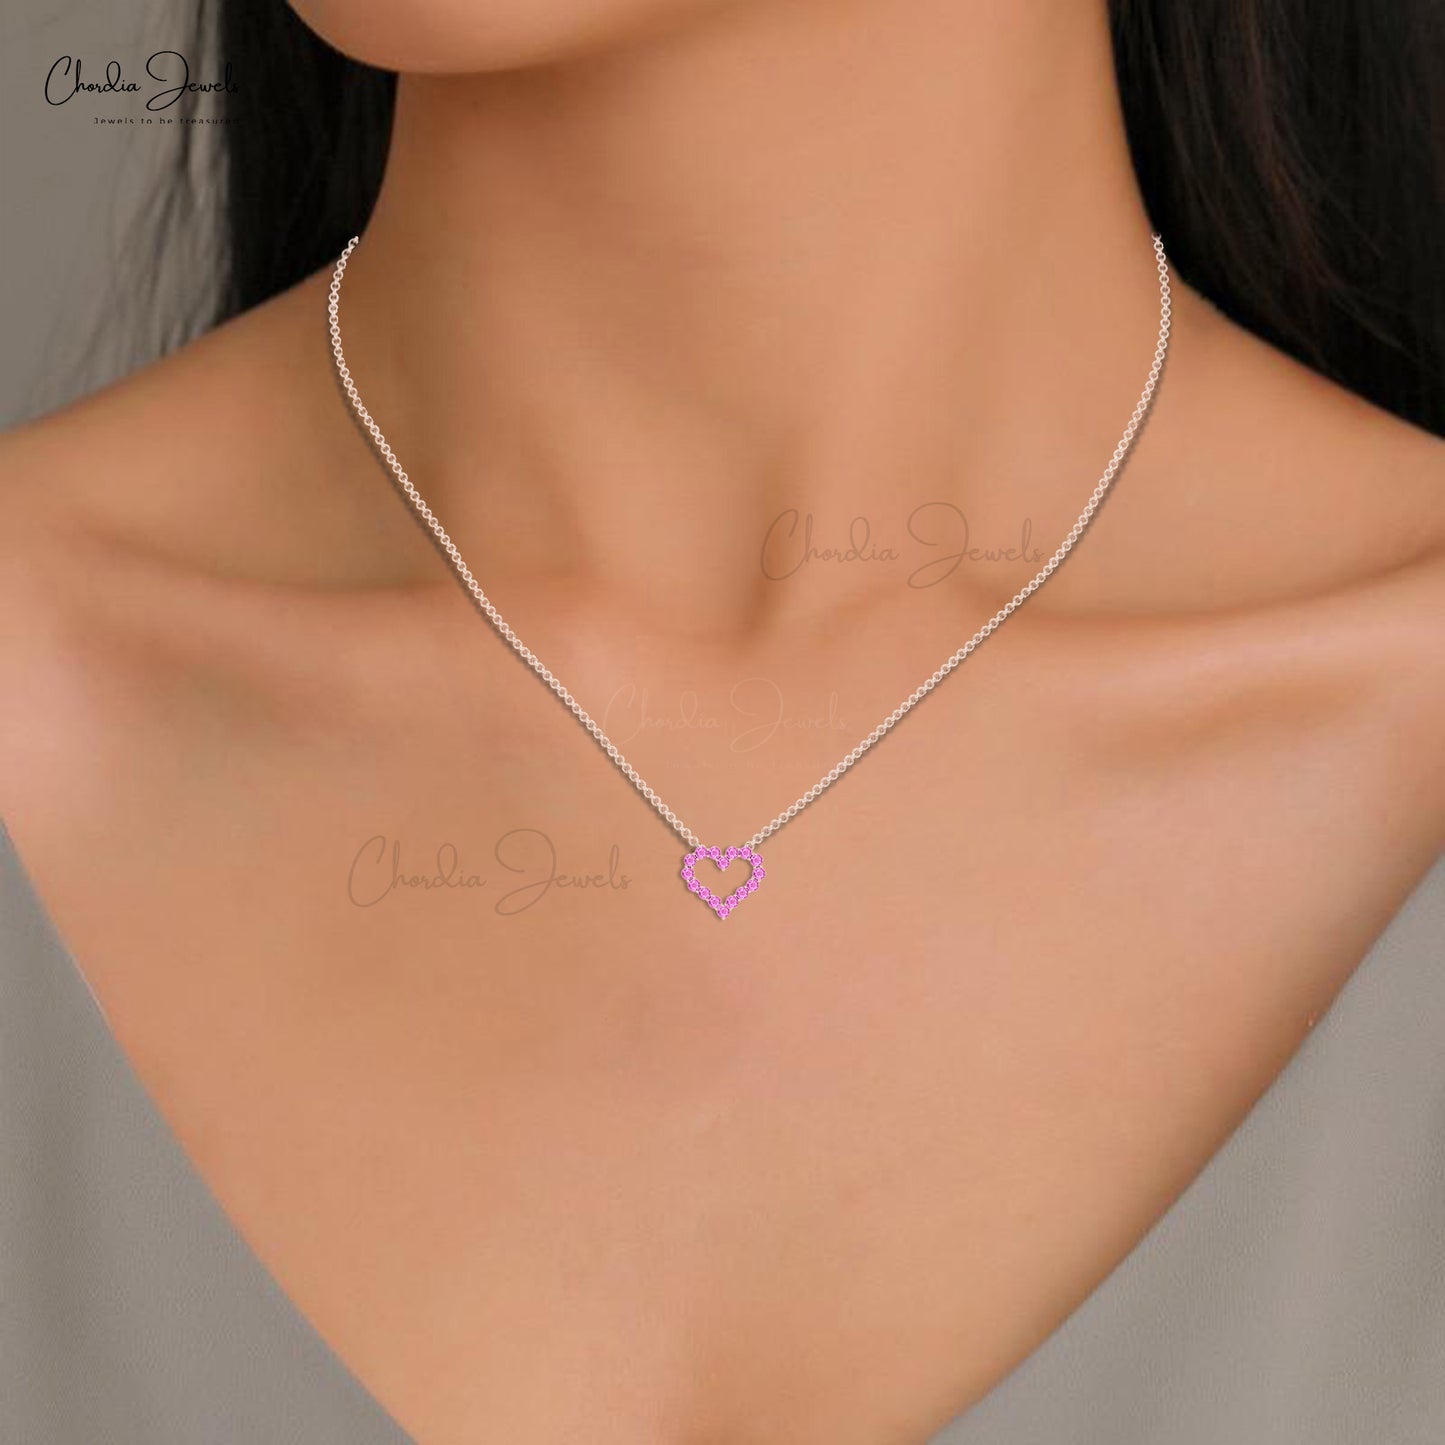 Delicate Genuine Pink Sapphire Heart Shape Necklace Pendant For Women 14k Real Gold Hallmarked Jewelry Engagement Gift